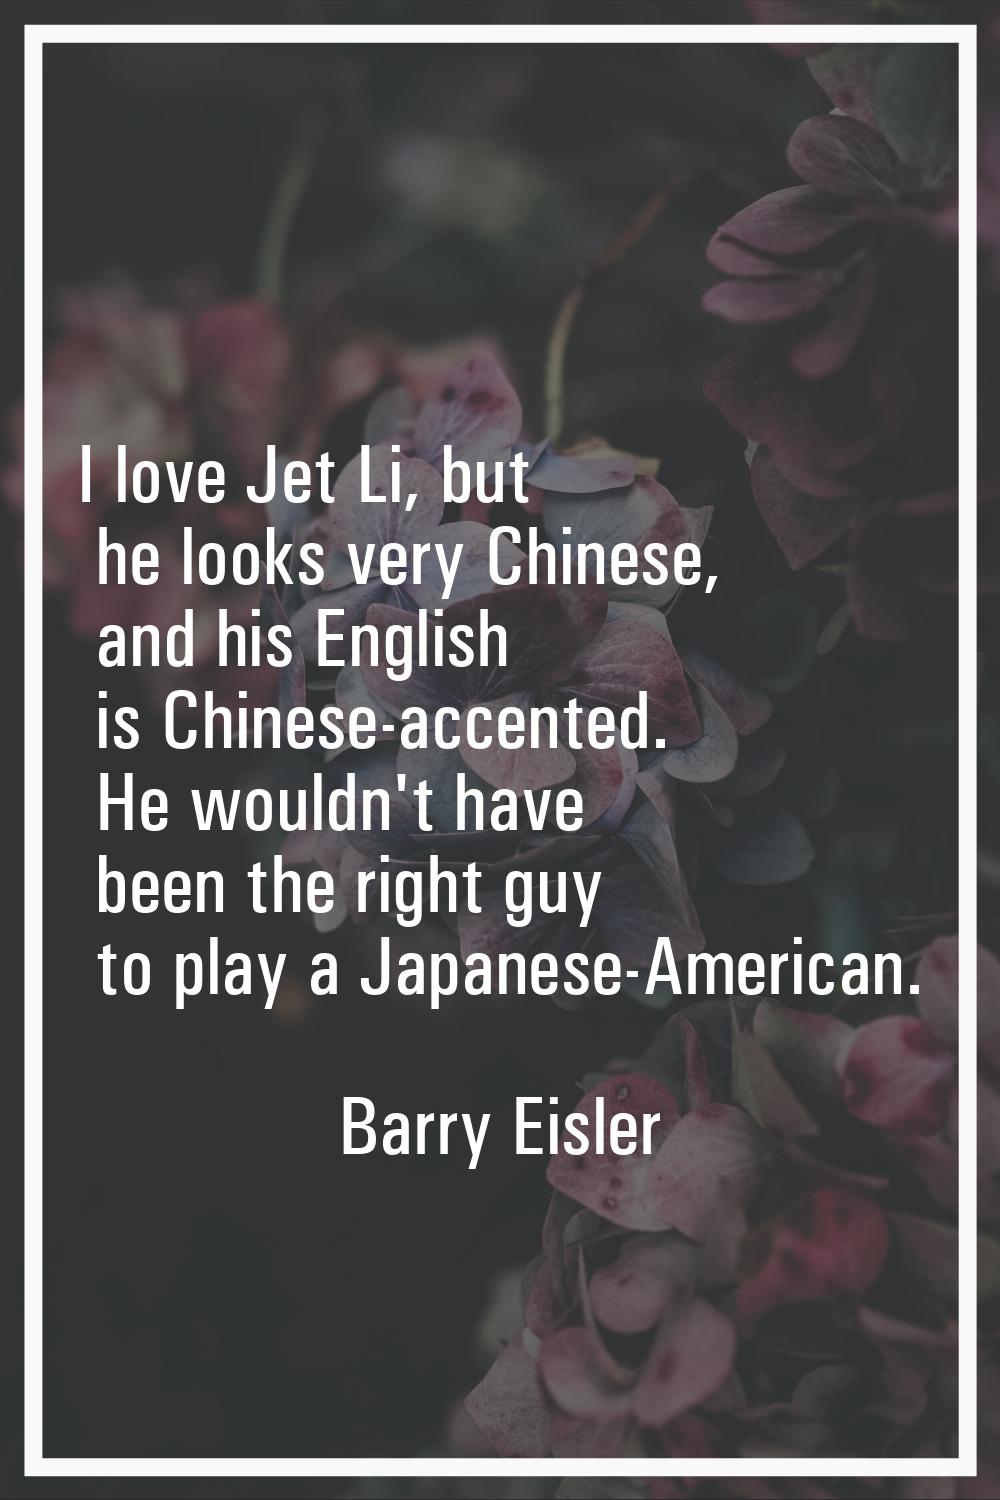 I love Jet Li, but he looks very Chinese, and his English is Chinese-accented. He wouldn't have bee